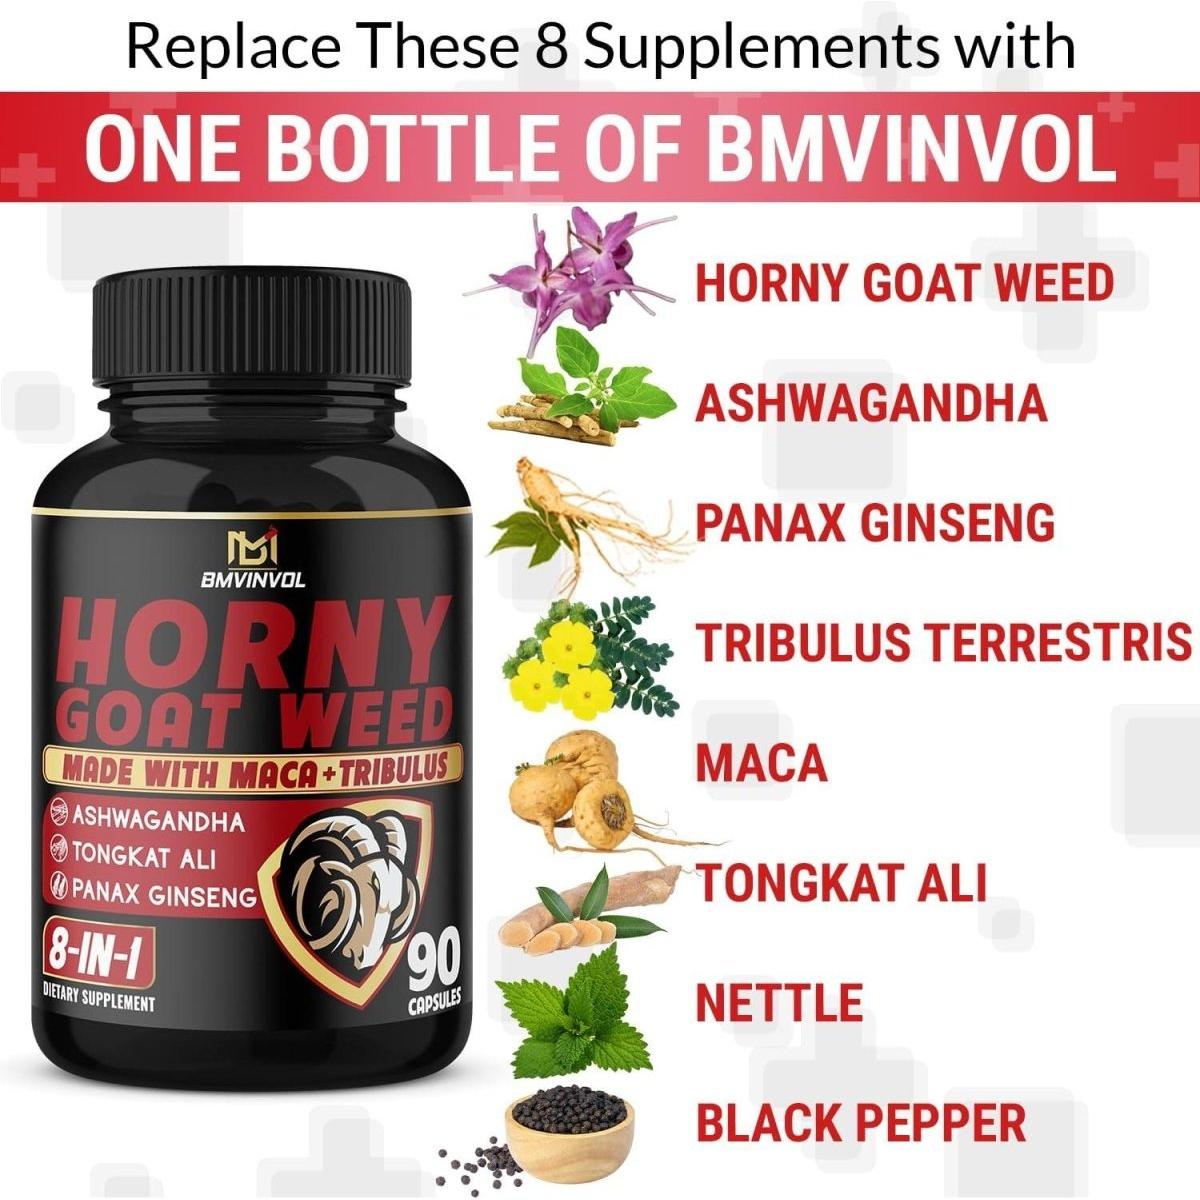 Horny Goat Weed Capsules - 7000Mg Herbal Equivalent - 3 Months Supply (90 Capsules) - Glam Global UK